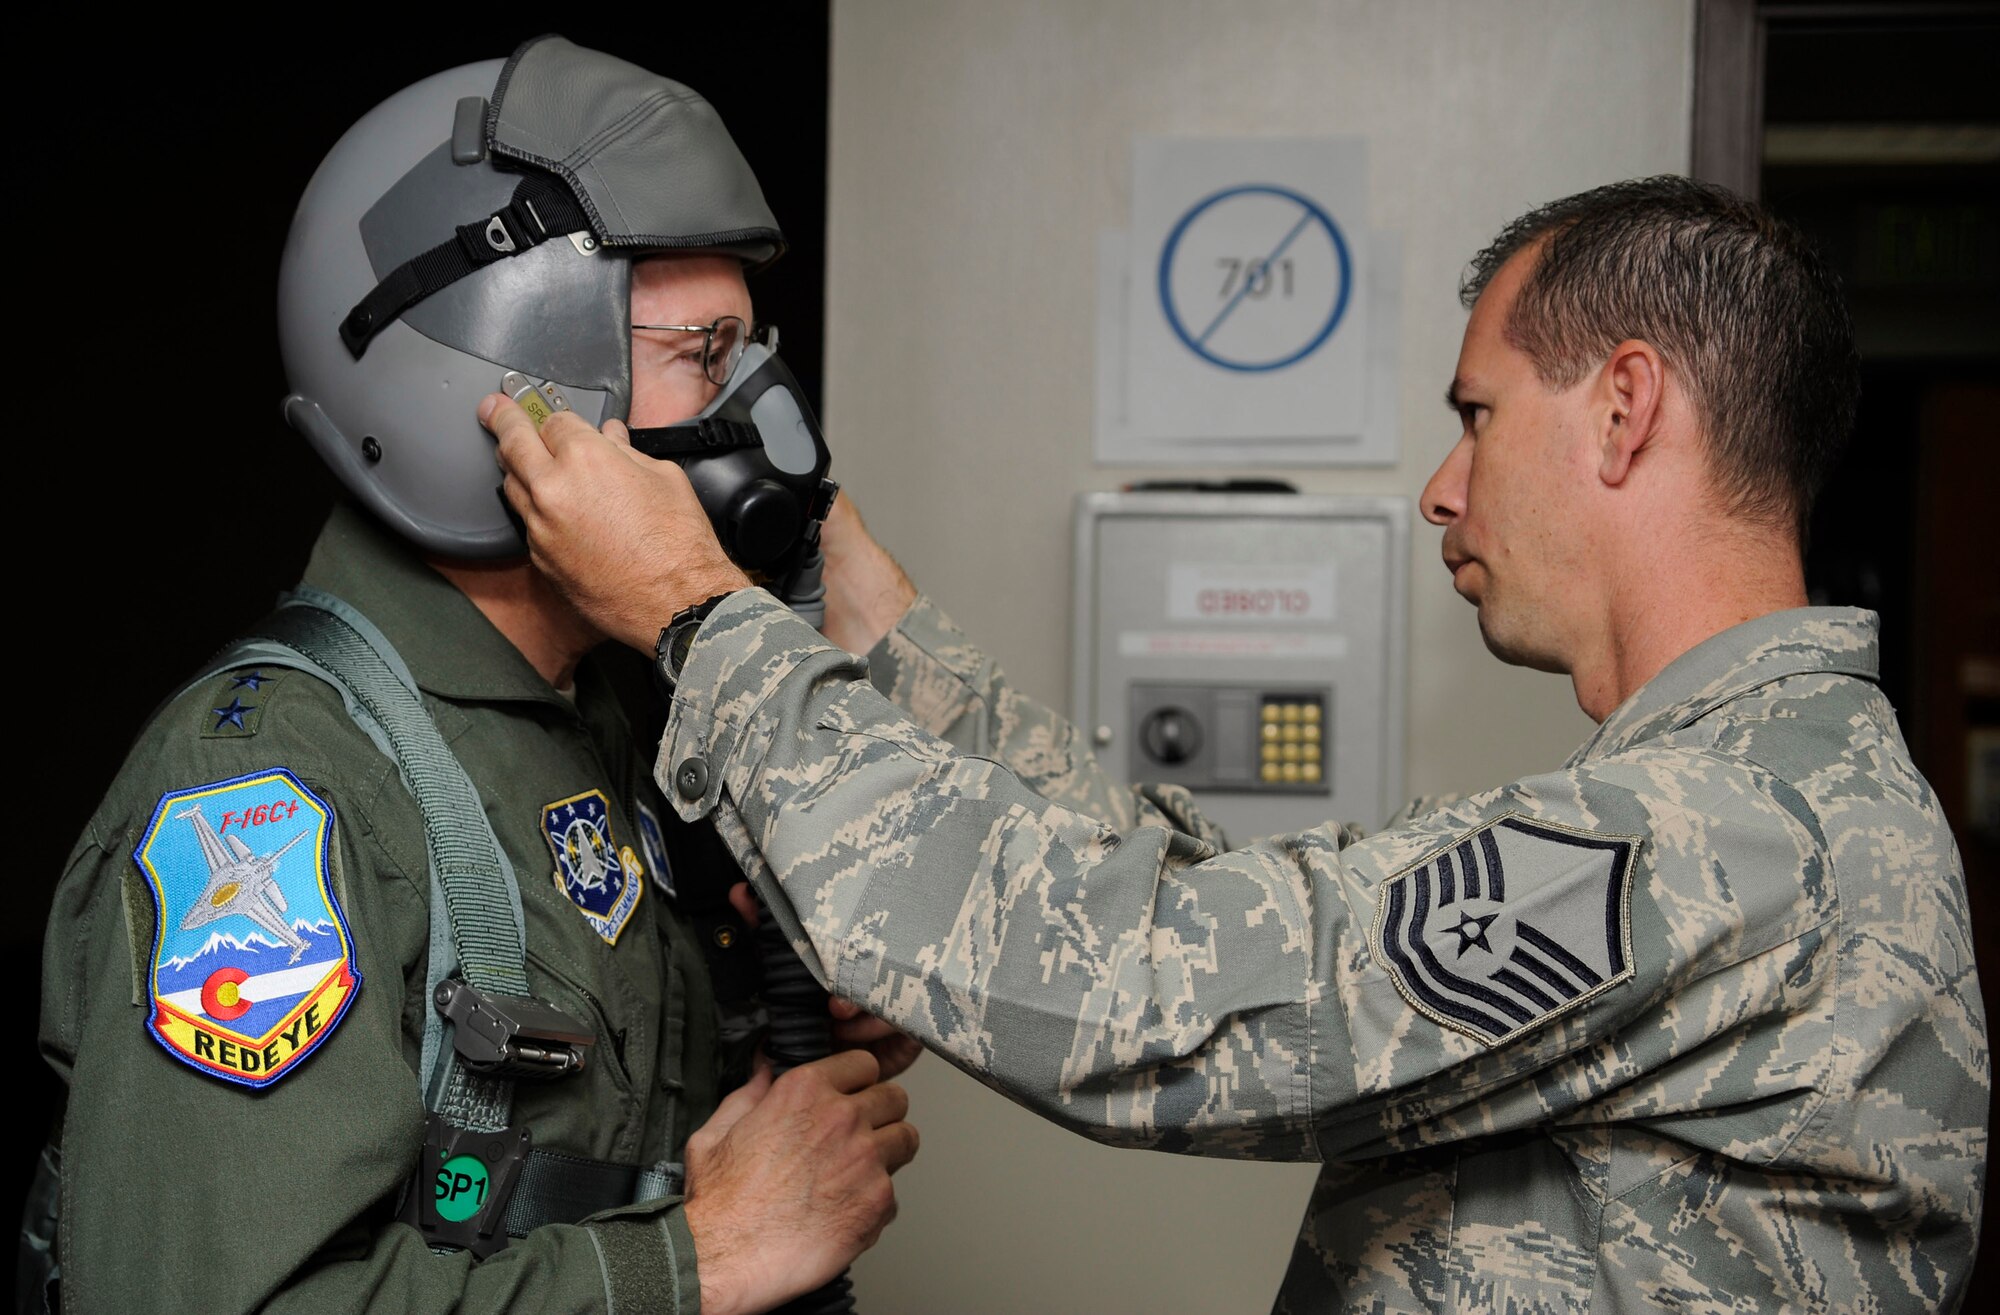 Master Sgt. Greg Roark, 120th Fighter Squadron Life Support NCOIC, fits Gen. C. Robert Kehler, Air Force Space Commander, in his helmet and face mask prior to an F-16 flight with the Colorado Air National Guard.  Gen Kehler spent the day learning about the missions of the Colorado Air National Guard as well as spending time with Airmen from the 460th Space Wing at Buckley Air Force Base.